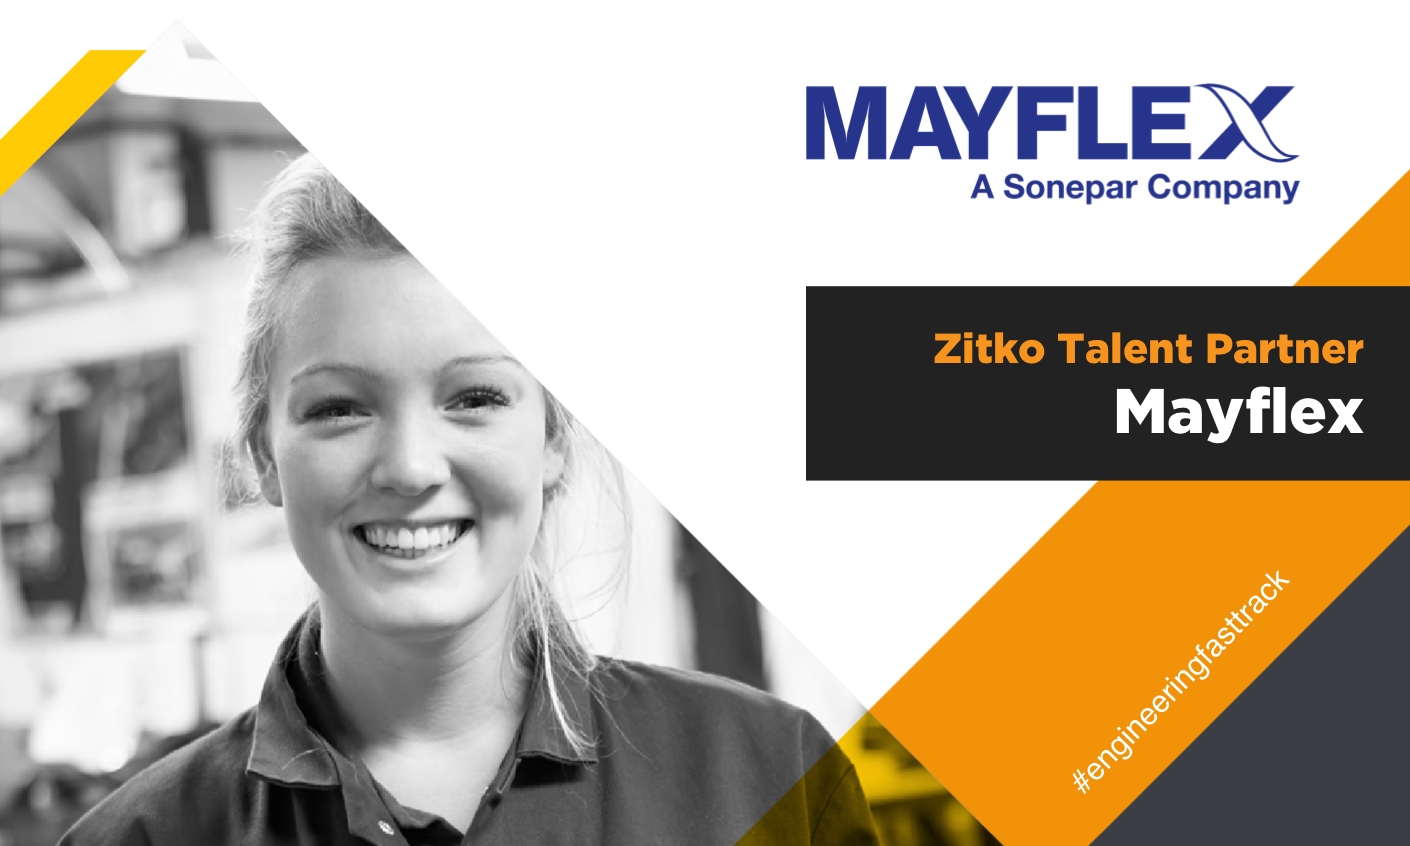 Mayflex to partner with Zitko Talent Programme